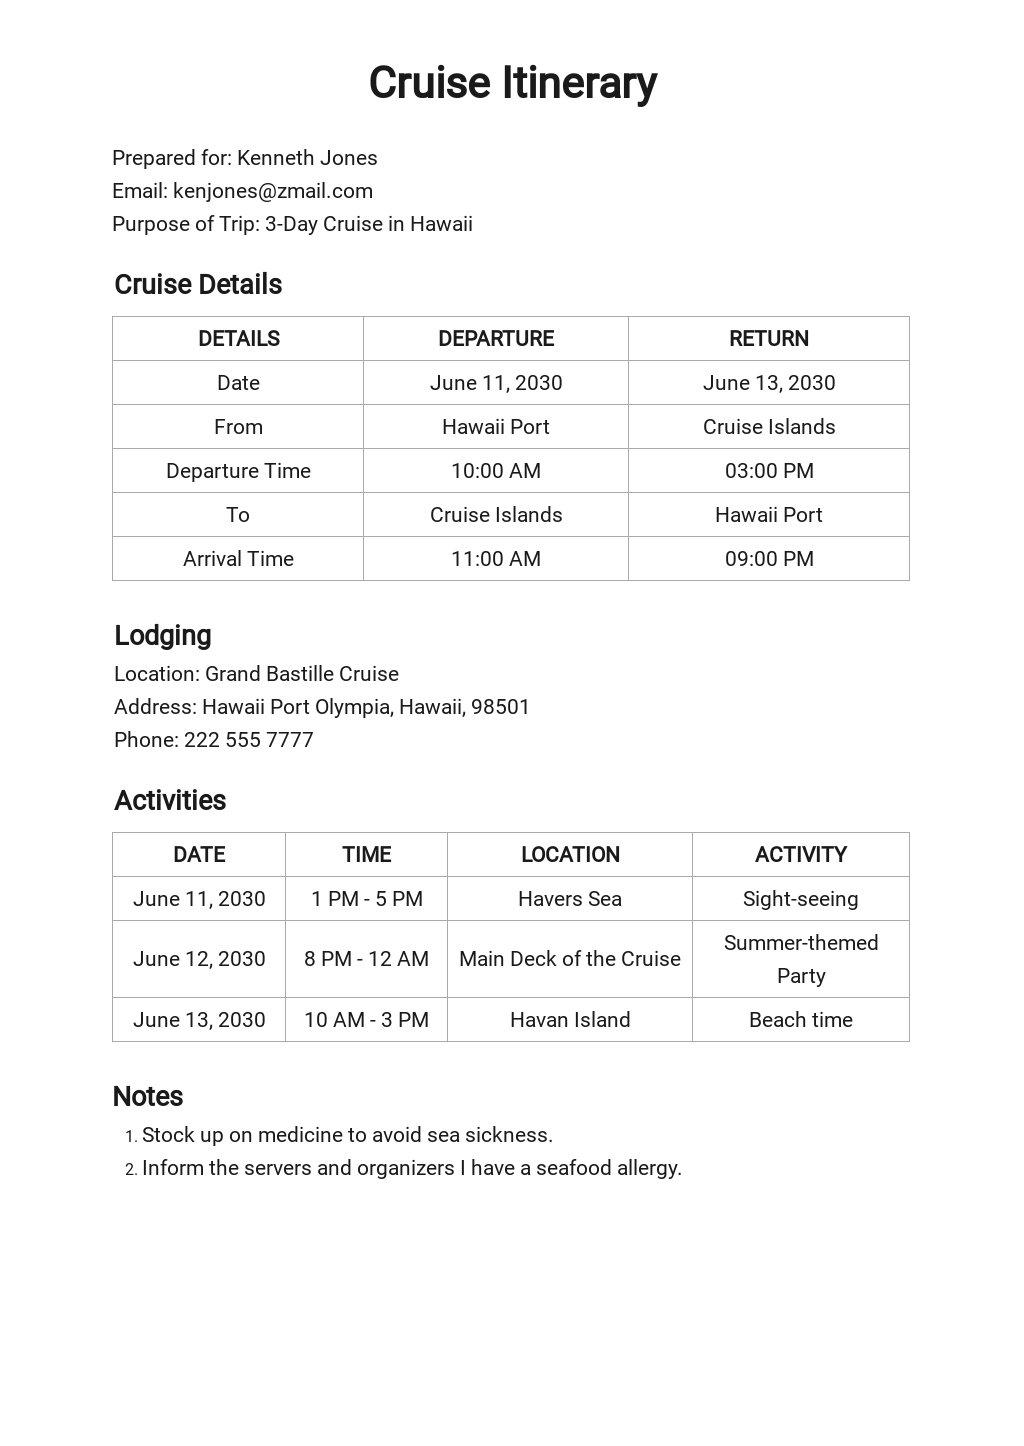 Cruise Itinerary Template